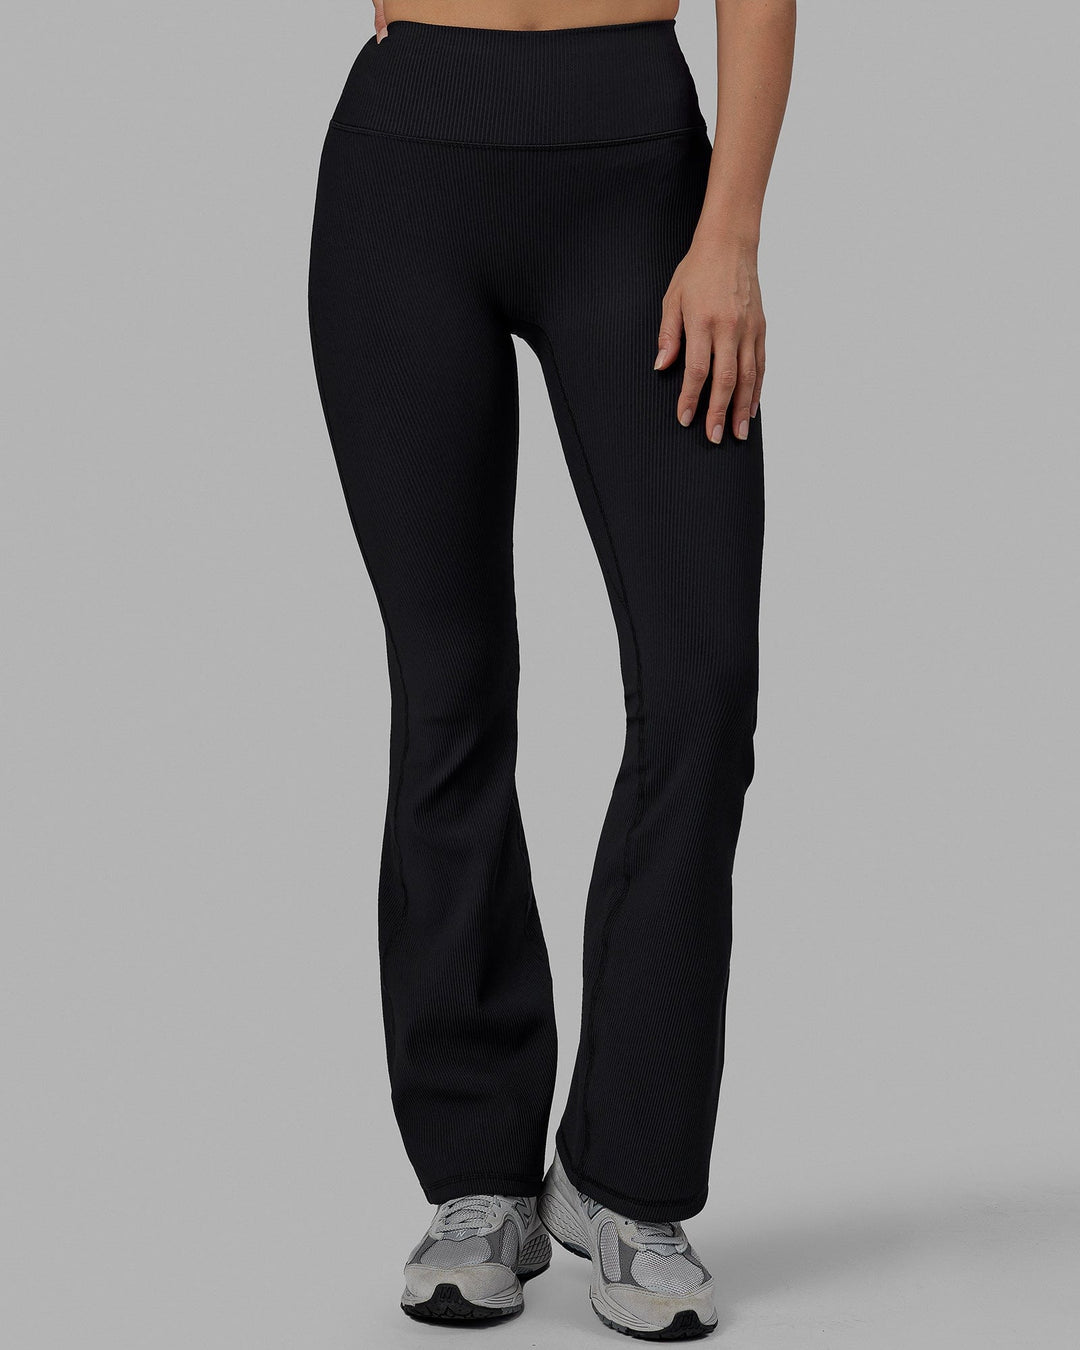 Woman wearing Everyday Ribbed Flare Tight - Black